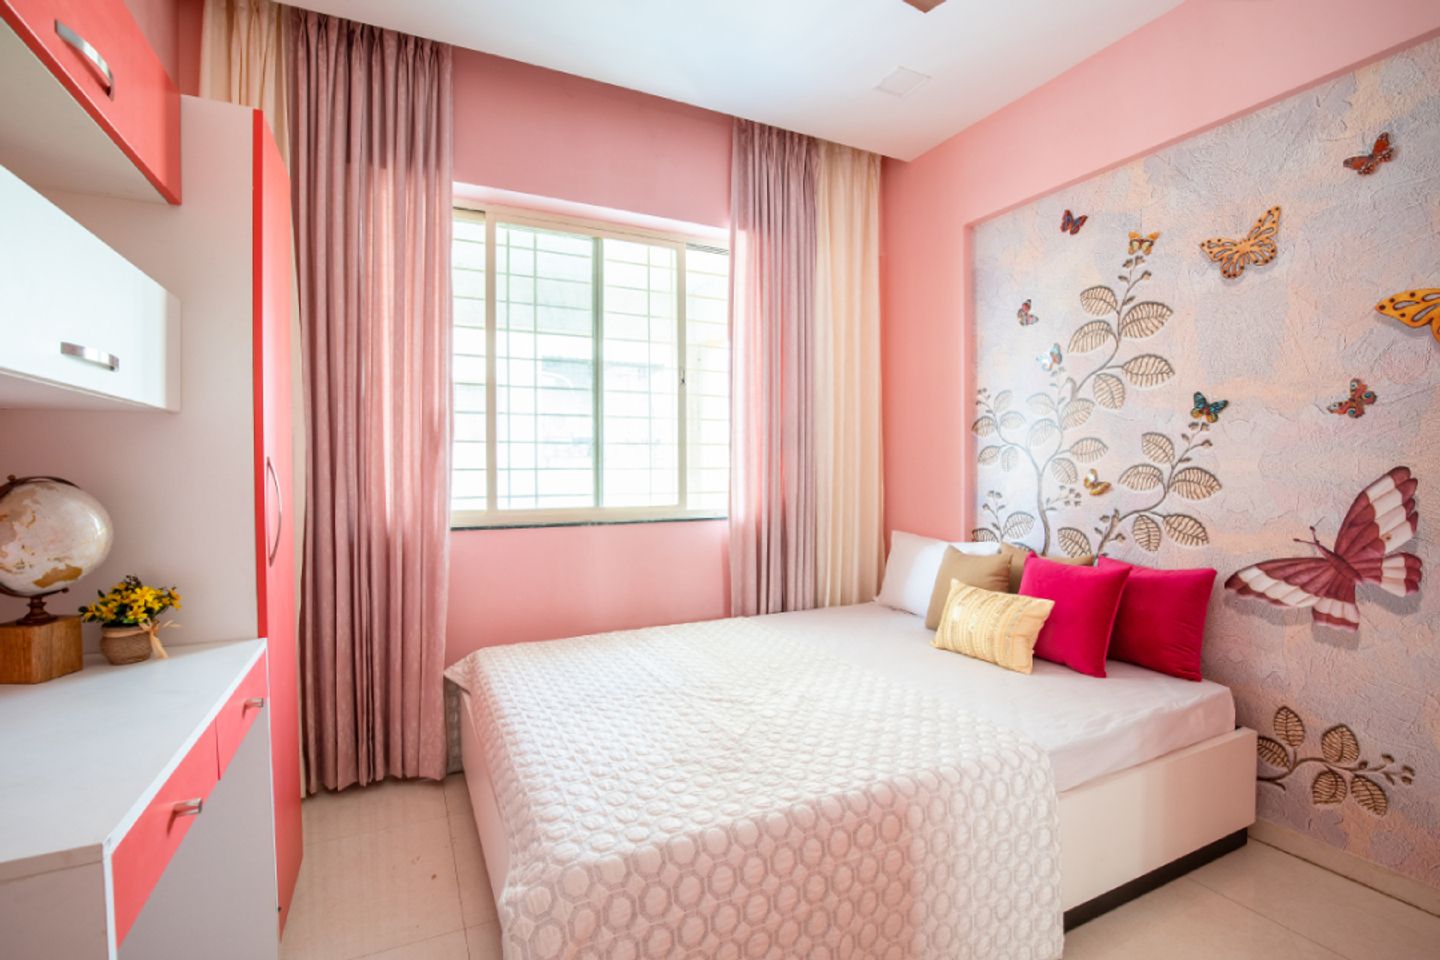 12x10 Ft Kids Room Design In Pink With Wooden Interiors - Livspace